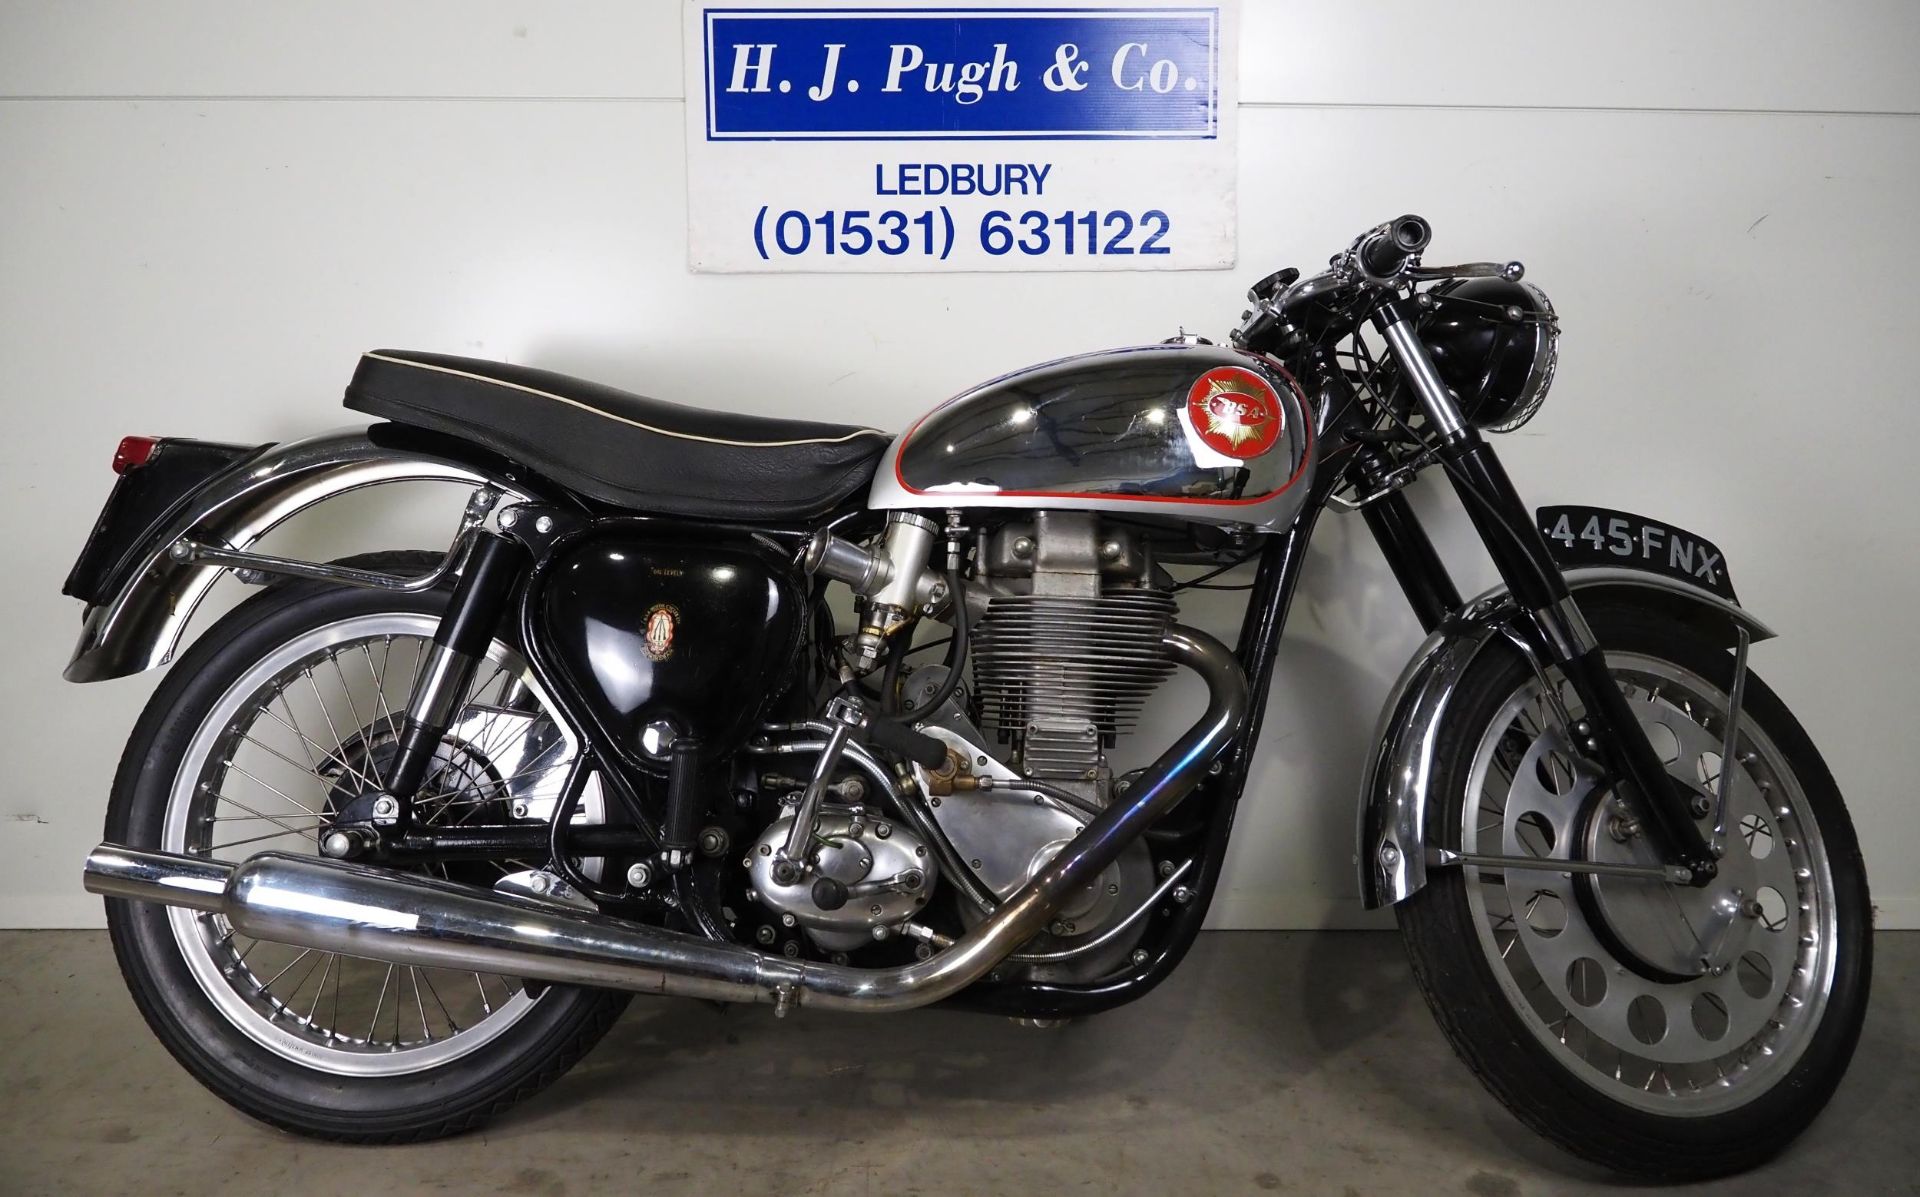 BSA Goldstar DBD34 Motorcycle. Believed to be 1961. 500cc. Frame no. CB32-11092 Engine no. - Image 2 of 10